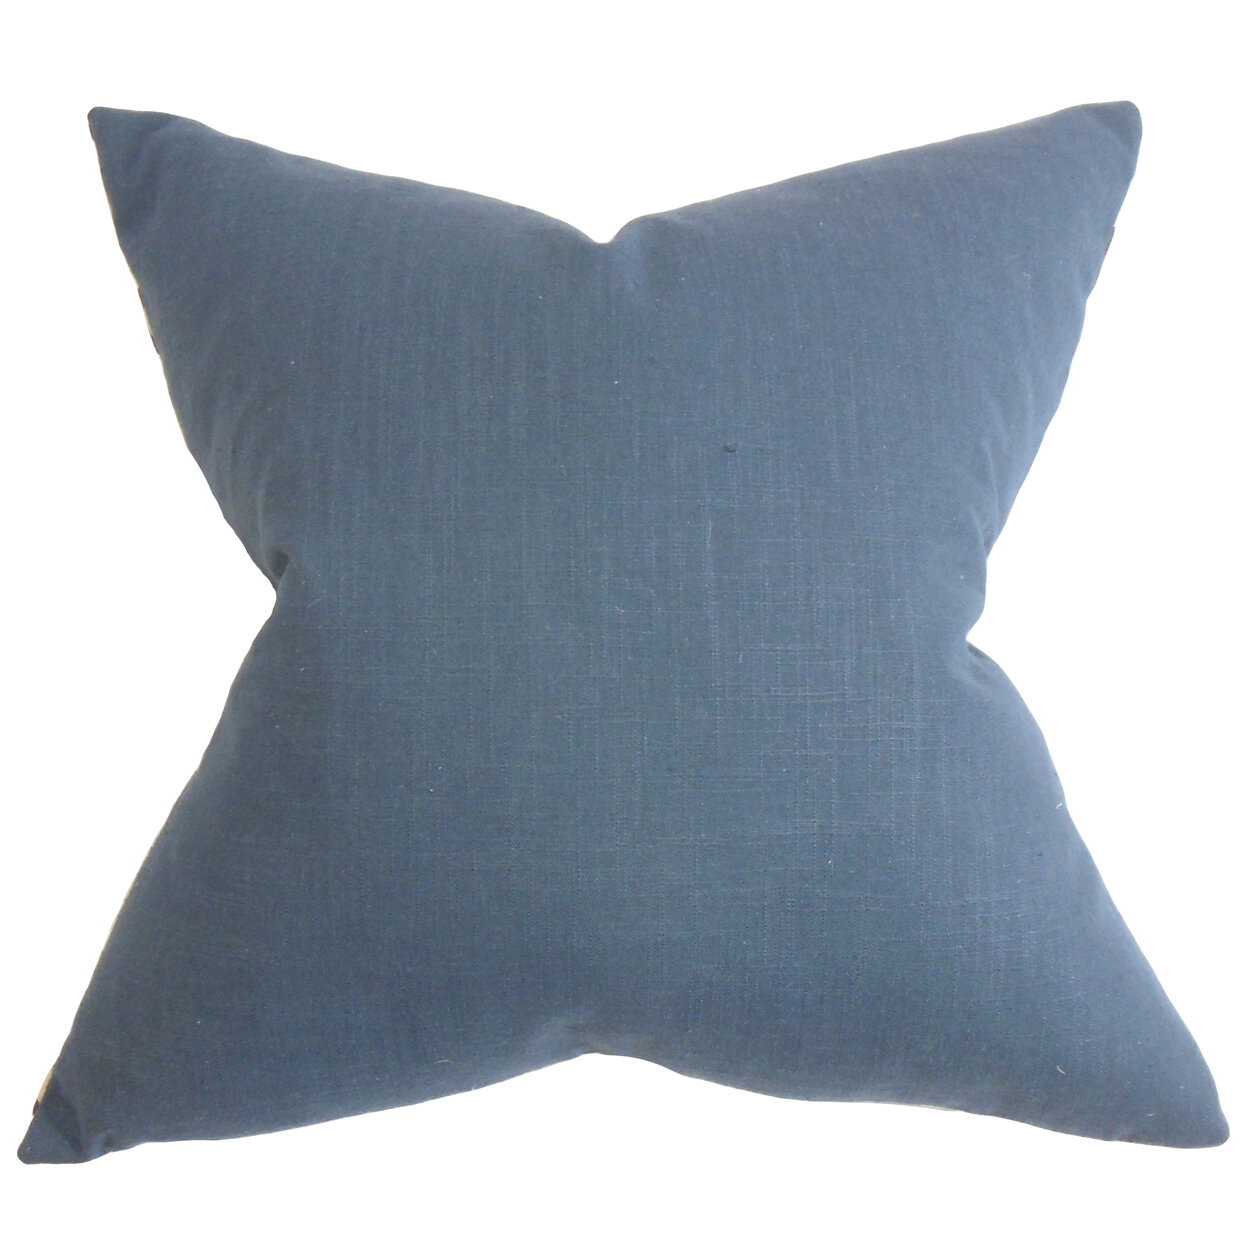 The Pillow Collection Ninian Solid Bedding Sham Blue Queen/20 x 30 